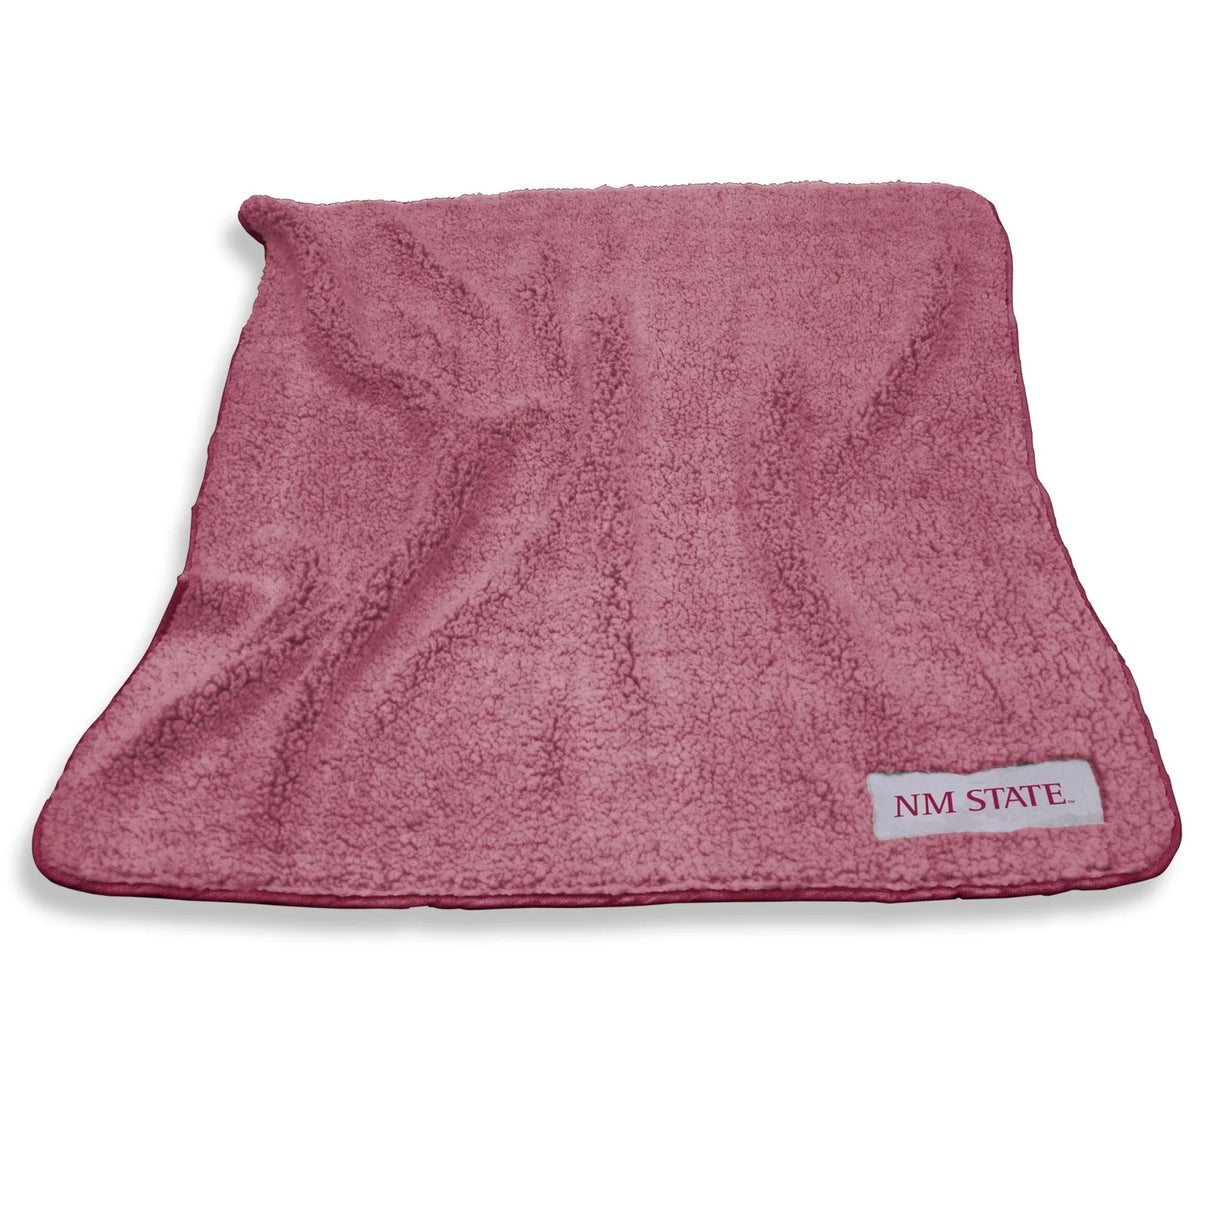 NM State Color Frosty Fleece Blanket